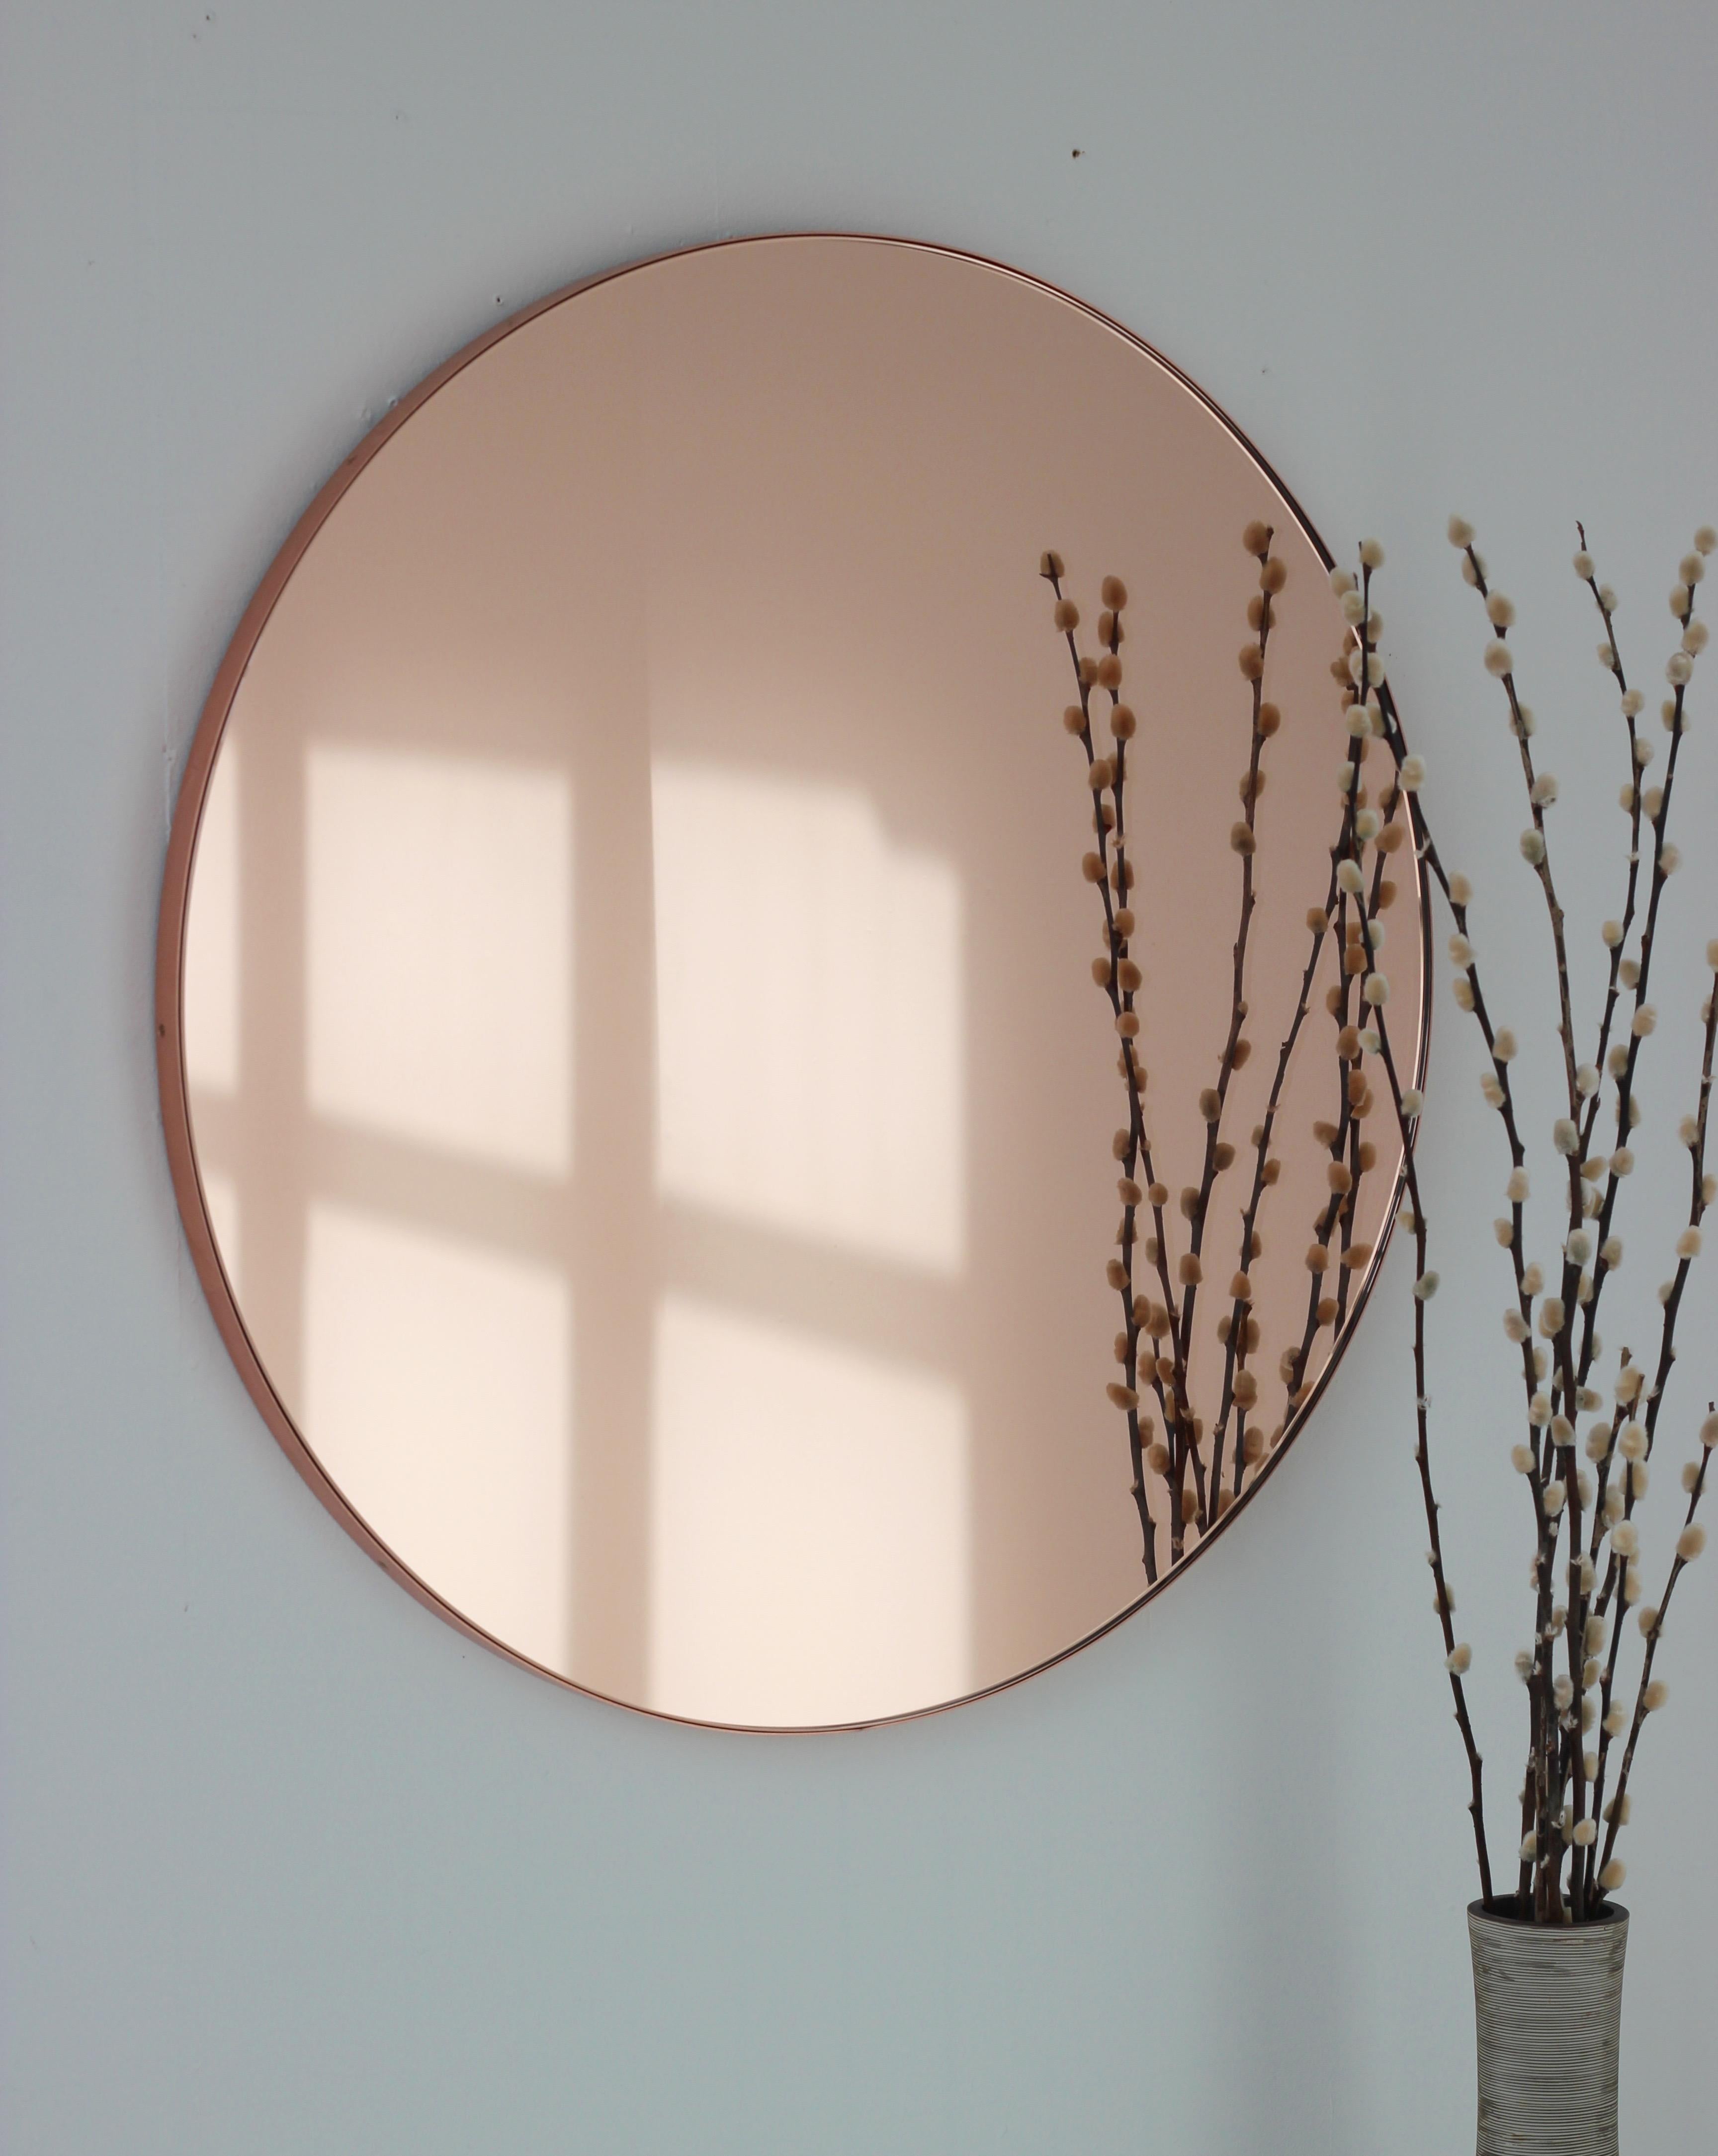 Contemporary Peach / Rose Gold tinted Orbis™ round mirror with a brushed copper frame. The detailing and finish, including visible copper plated screws, emphasise the craft and quality feel of the mirror. Designed and handcrafted in London,